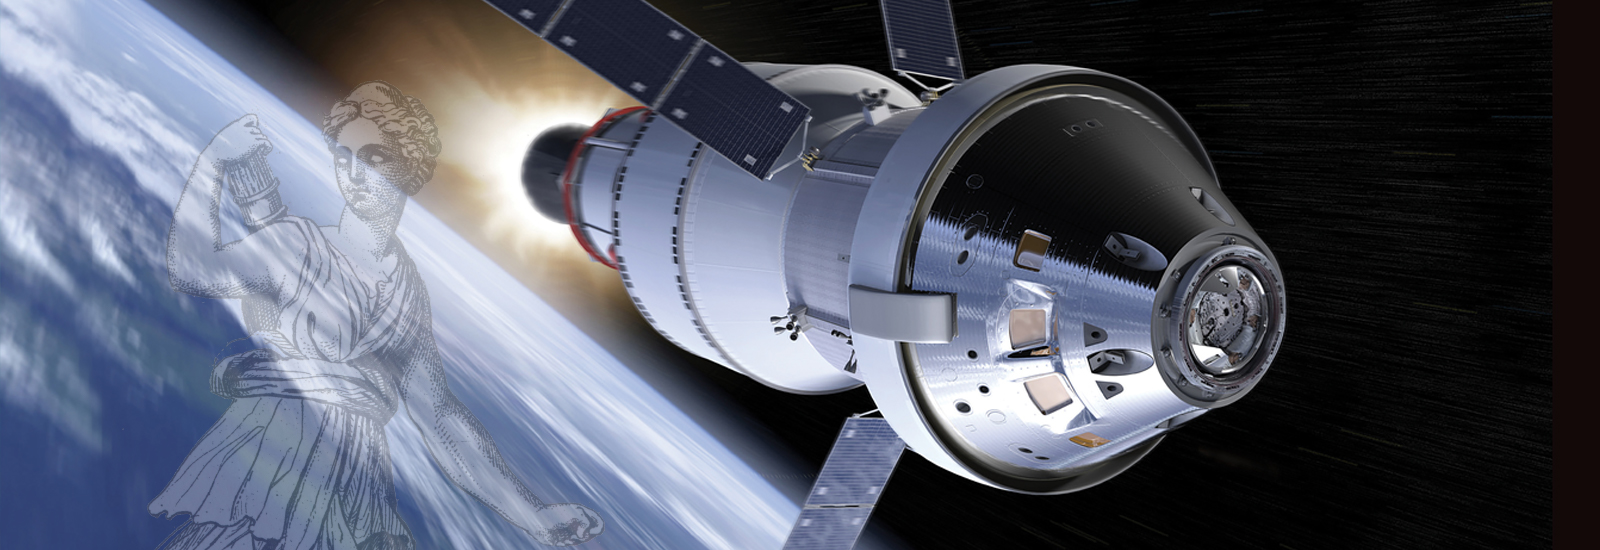 Orion will take us farther than we’ve gone before, and dock with the Gateway in orbit around the moon.